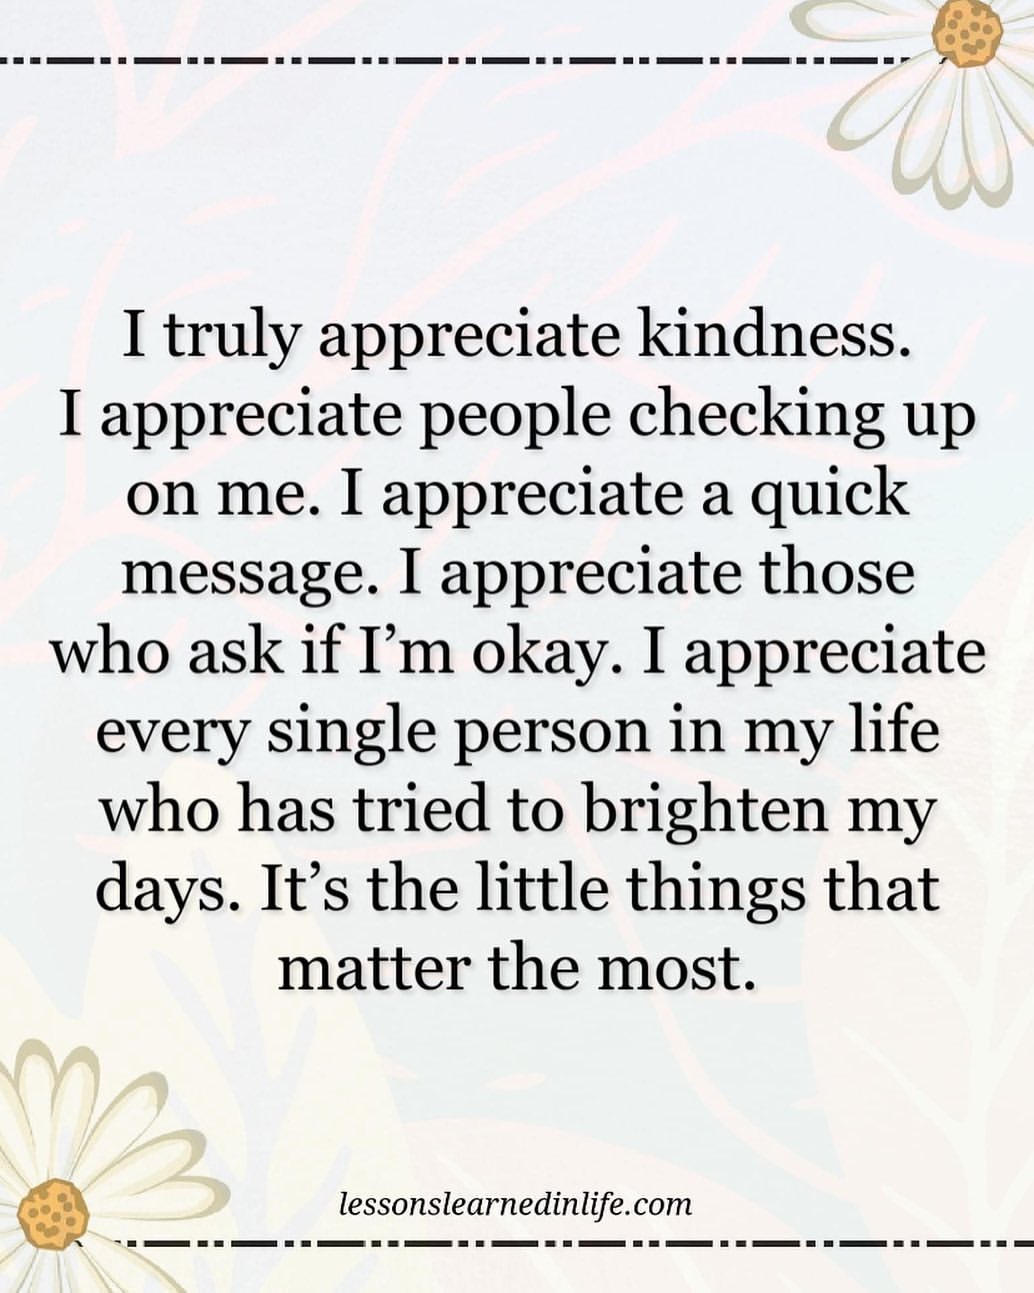 I truly appreciate kindness. I appreciate people checking up on me. I appreciate a quick message. I appreciate those who ask if I'm okay. I appreciate every single person in my life who has tried to brighten my days. It's the little things that matter the most.